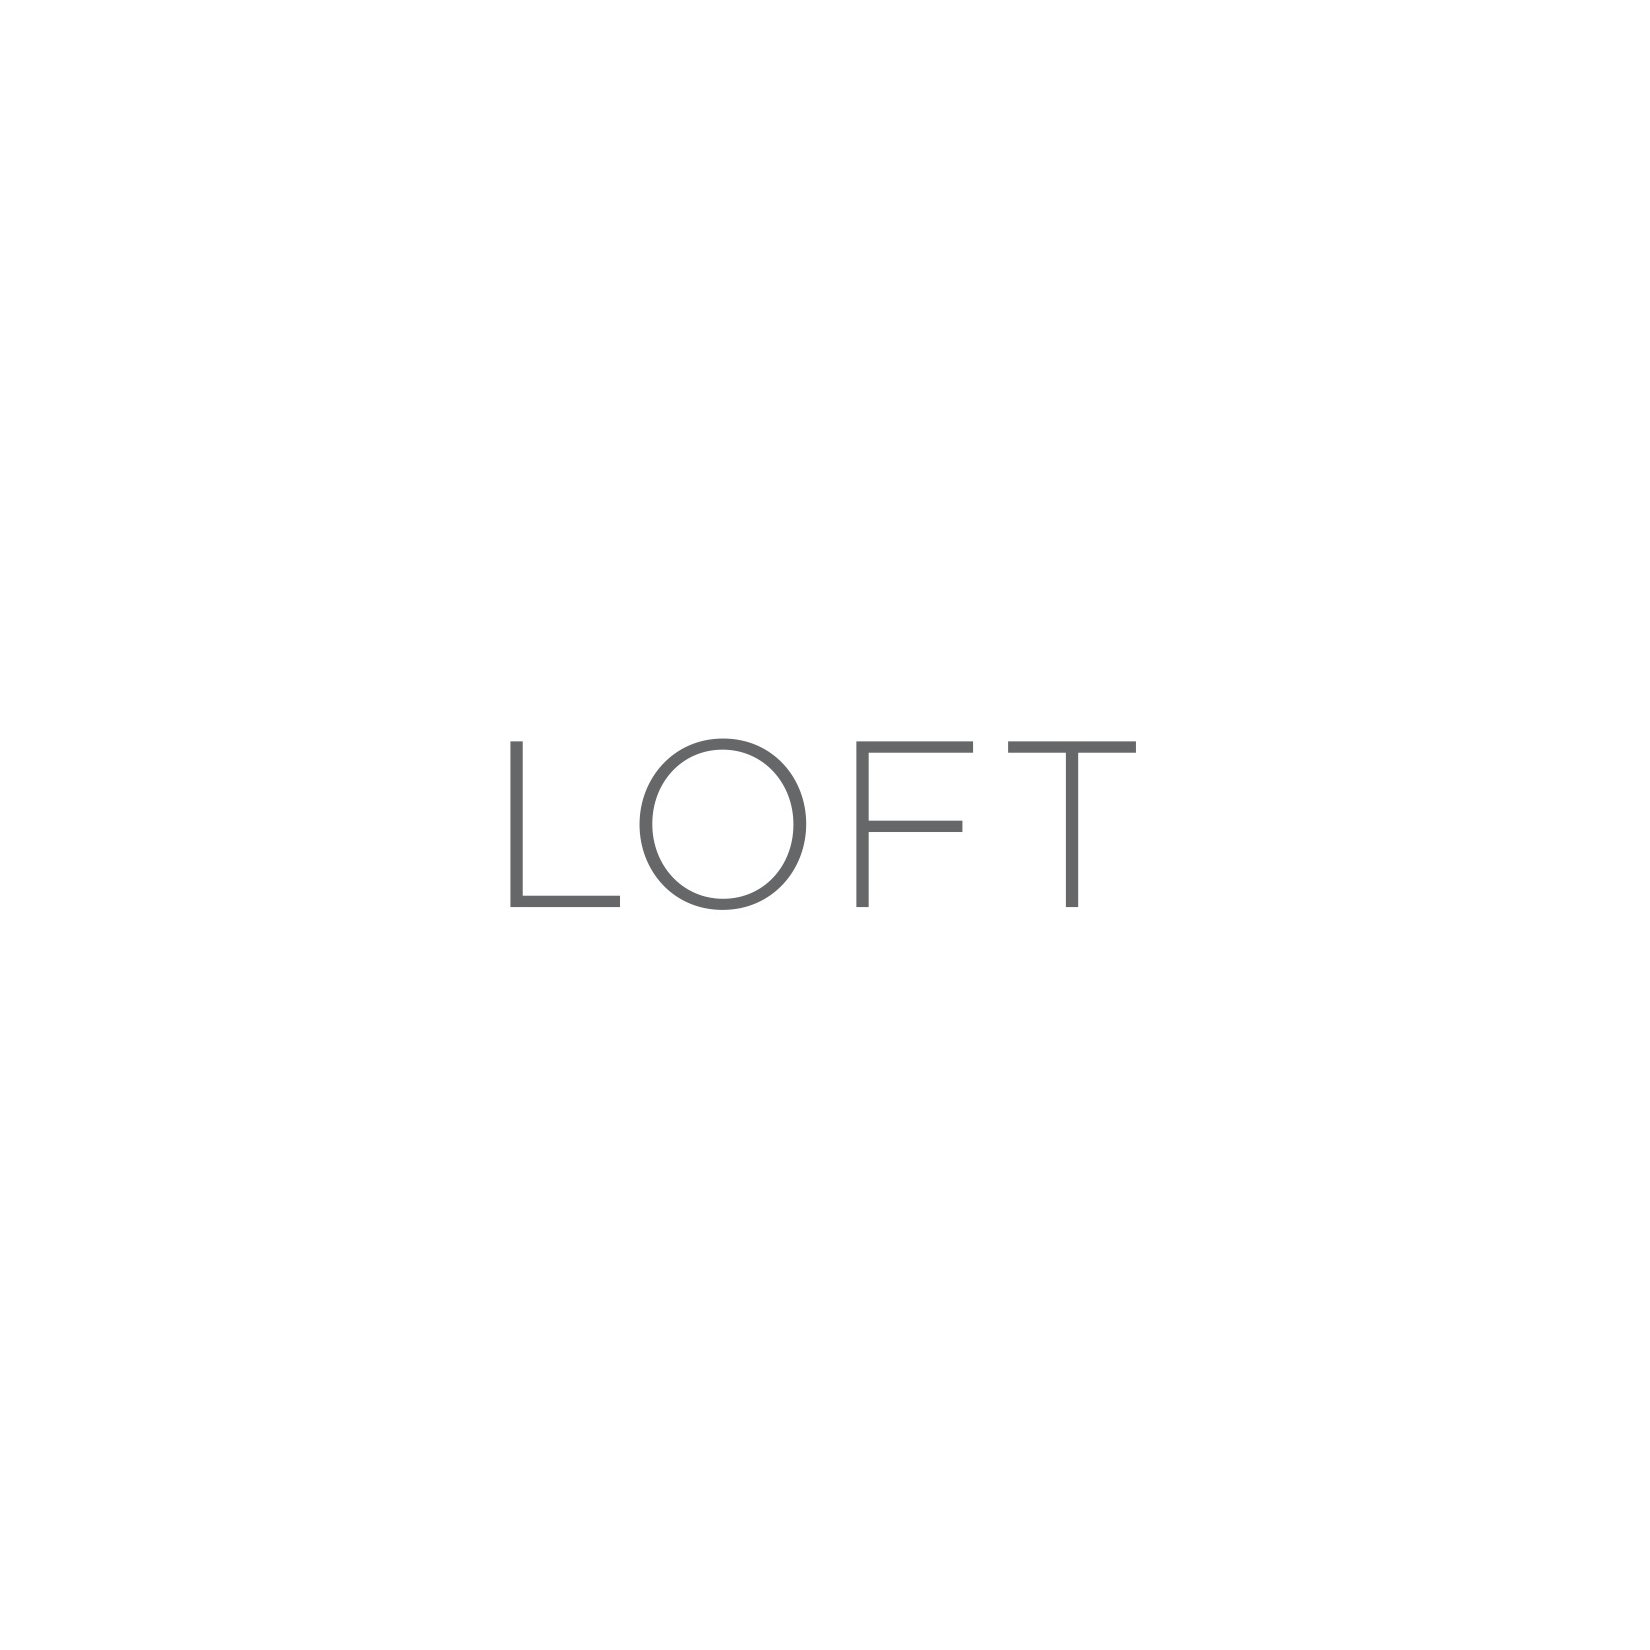 Loft Streets Of Cranberry Women S Clothing Petites Dresses Pants Shirts Sweaters In Cranberry Township Pa [ 1650 x 1650 Pixel ]